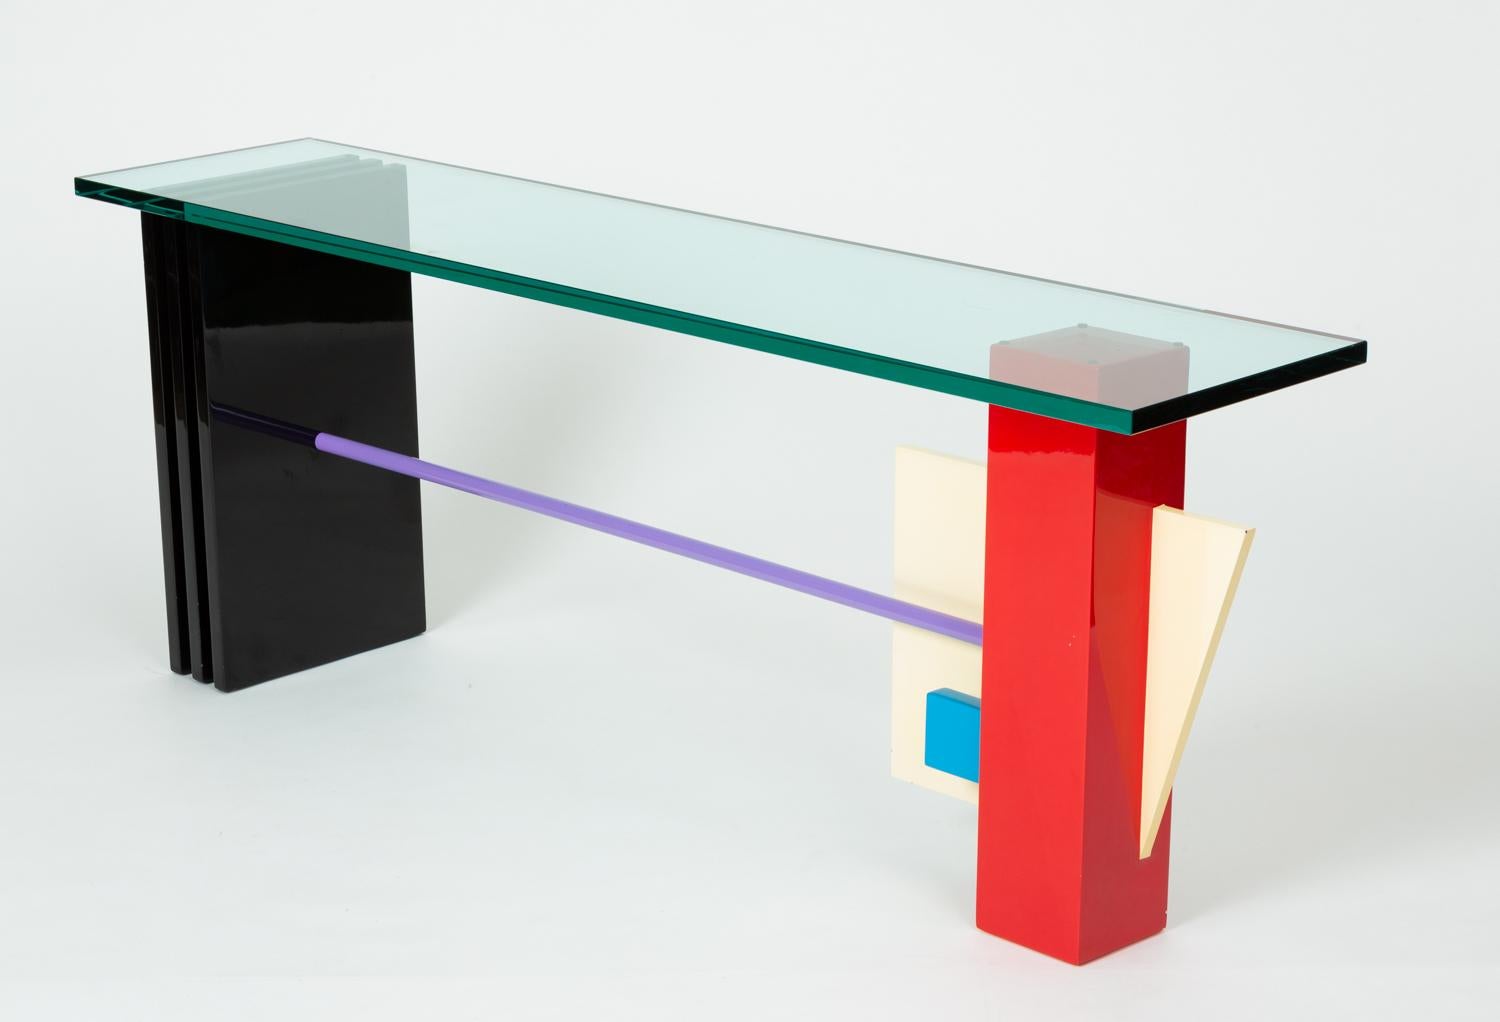 Bold geometry and colors are at work in this 1980s Peter Shire-esque console table. A thick glass slab perches on top of two mismatched columns, joined by a whimsical lavender-painted dowel support. One column has a vertical slat construction in